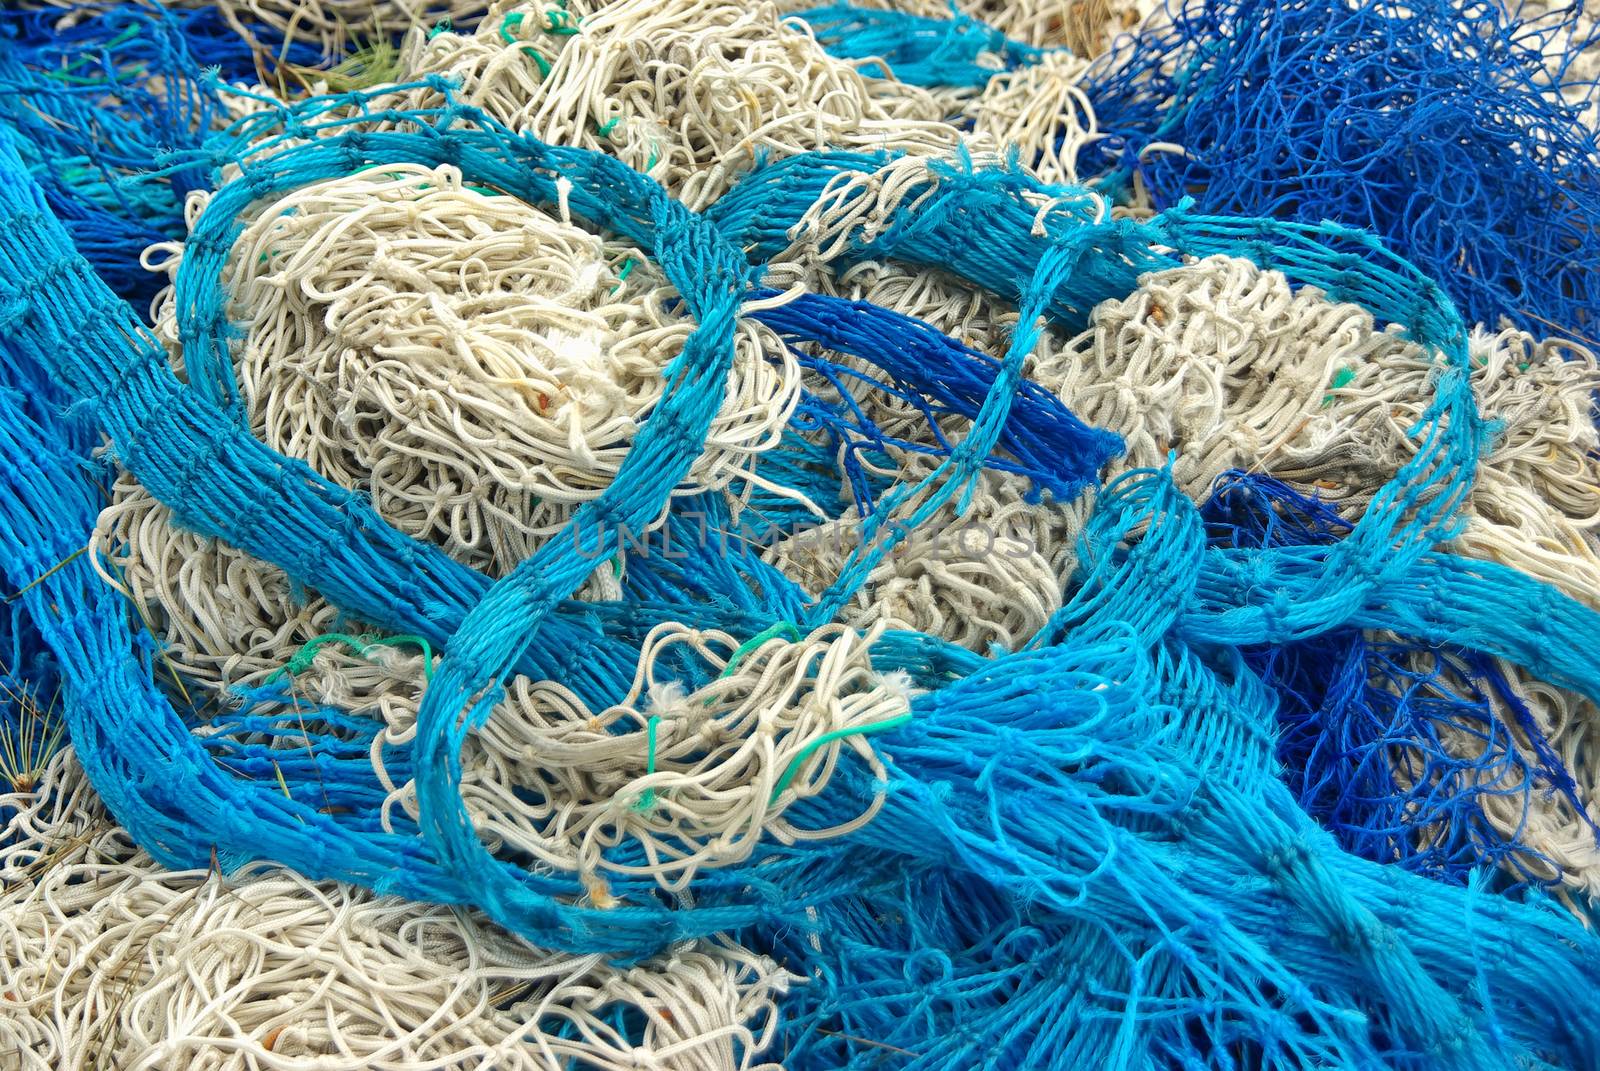 Details of a fisher net